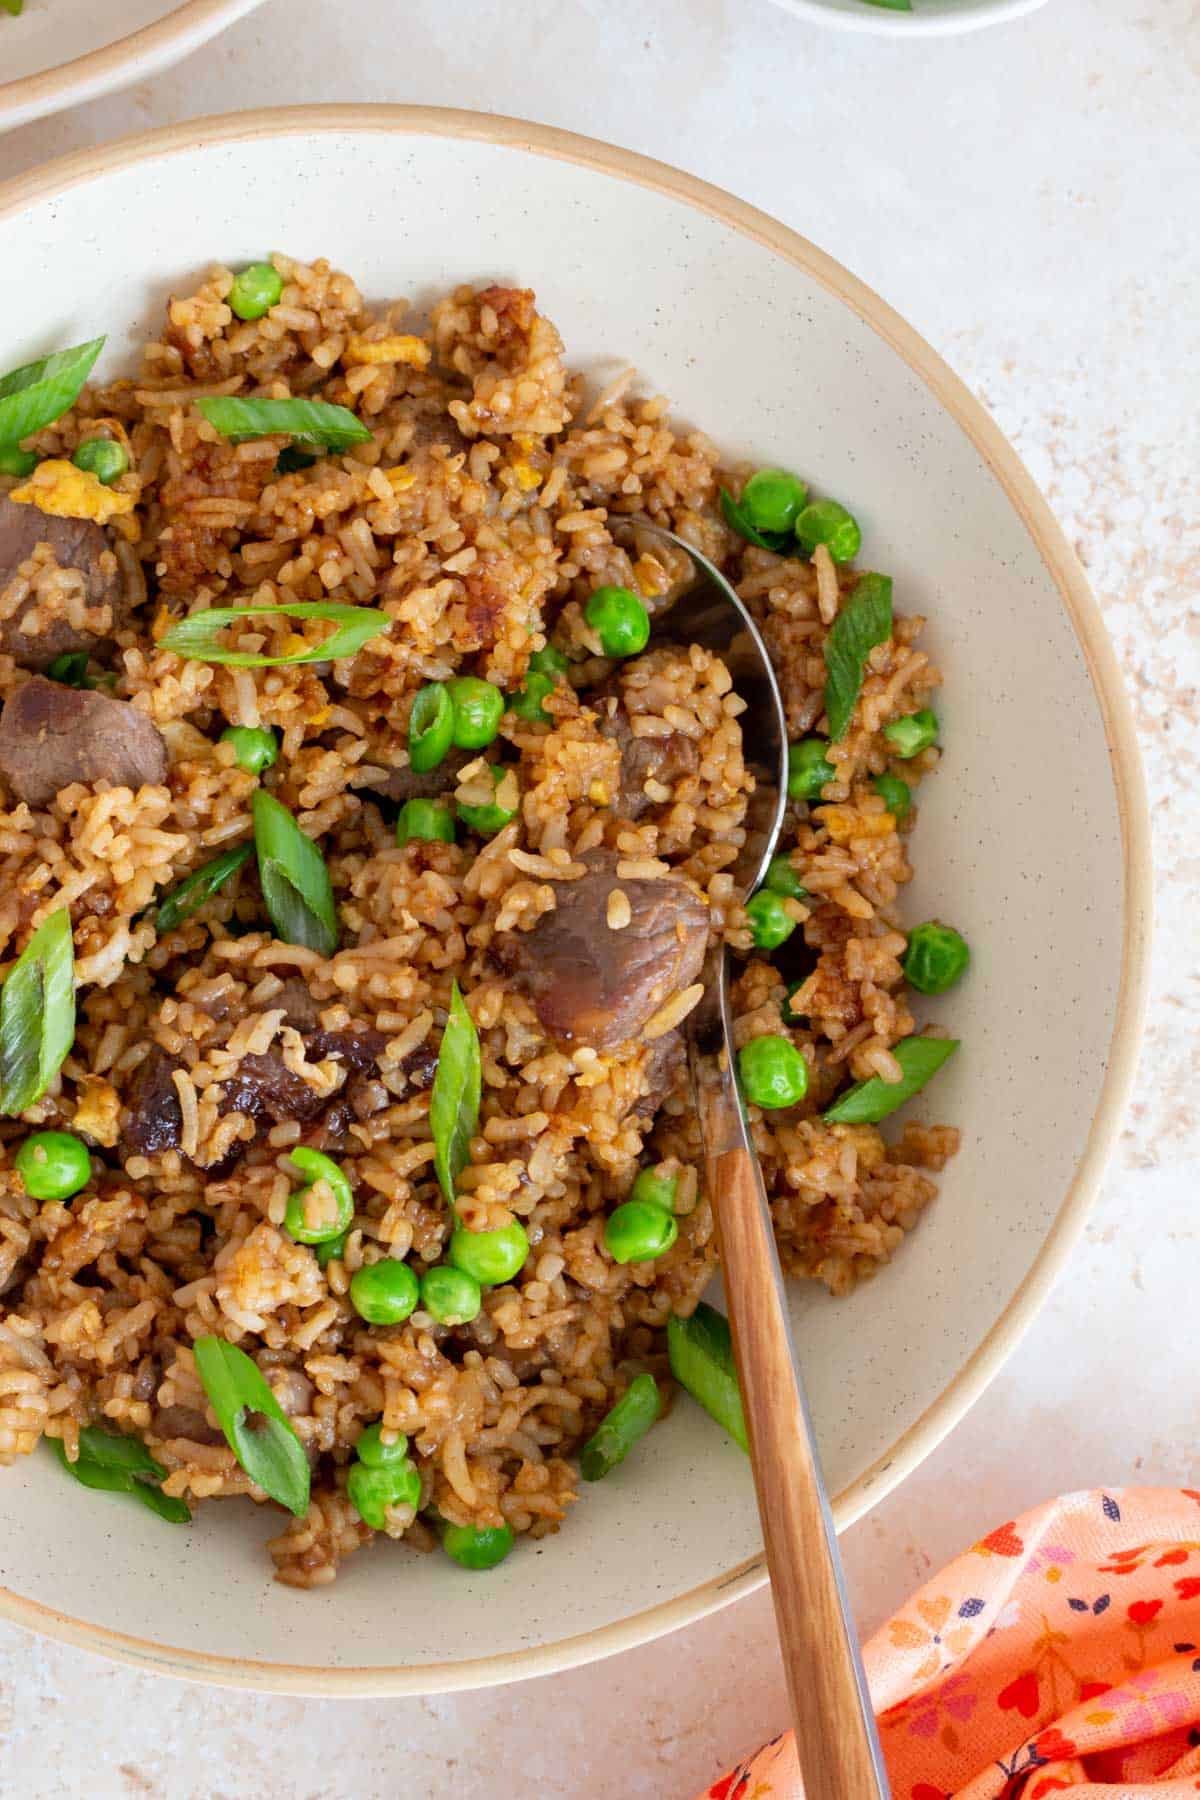 A close up view of steak fried rice with a spoon.